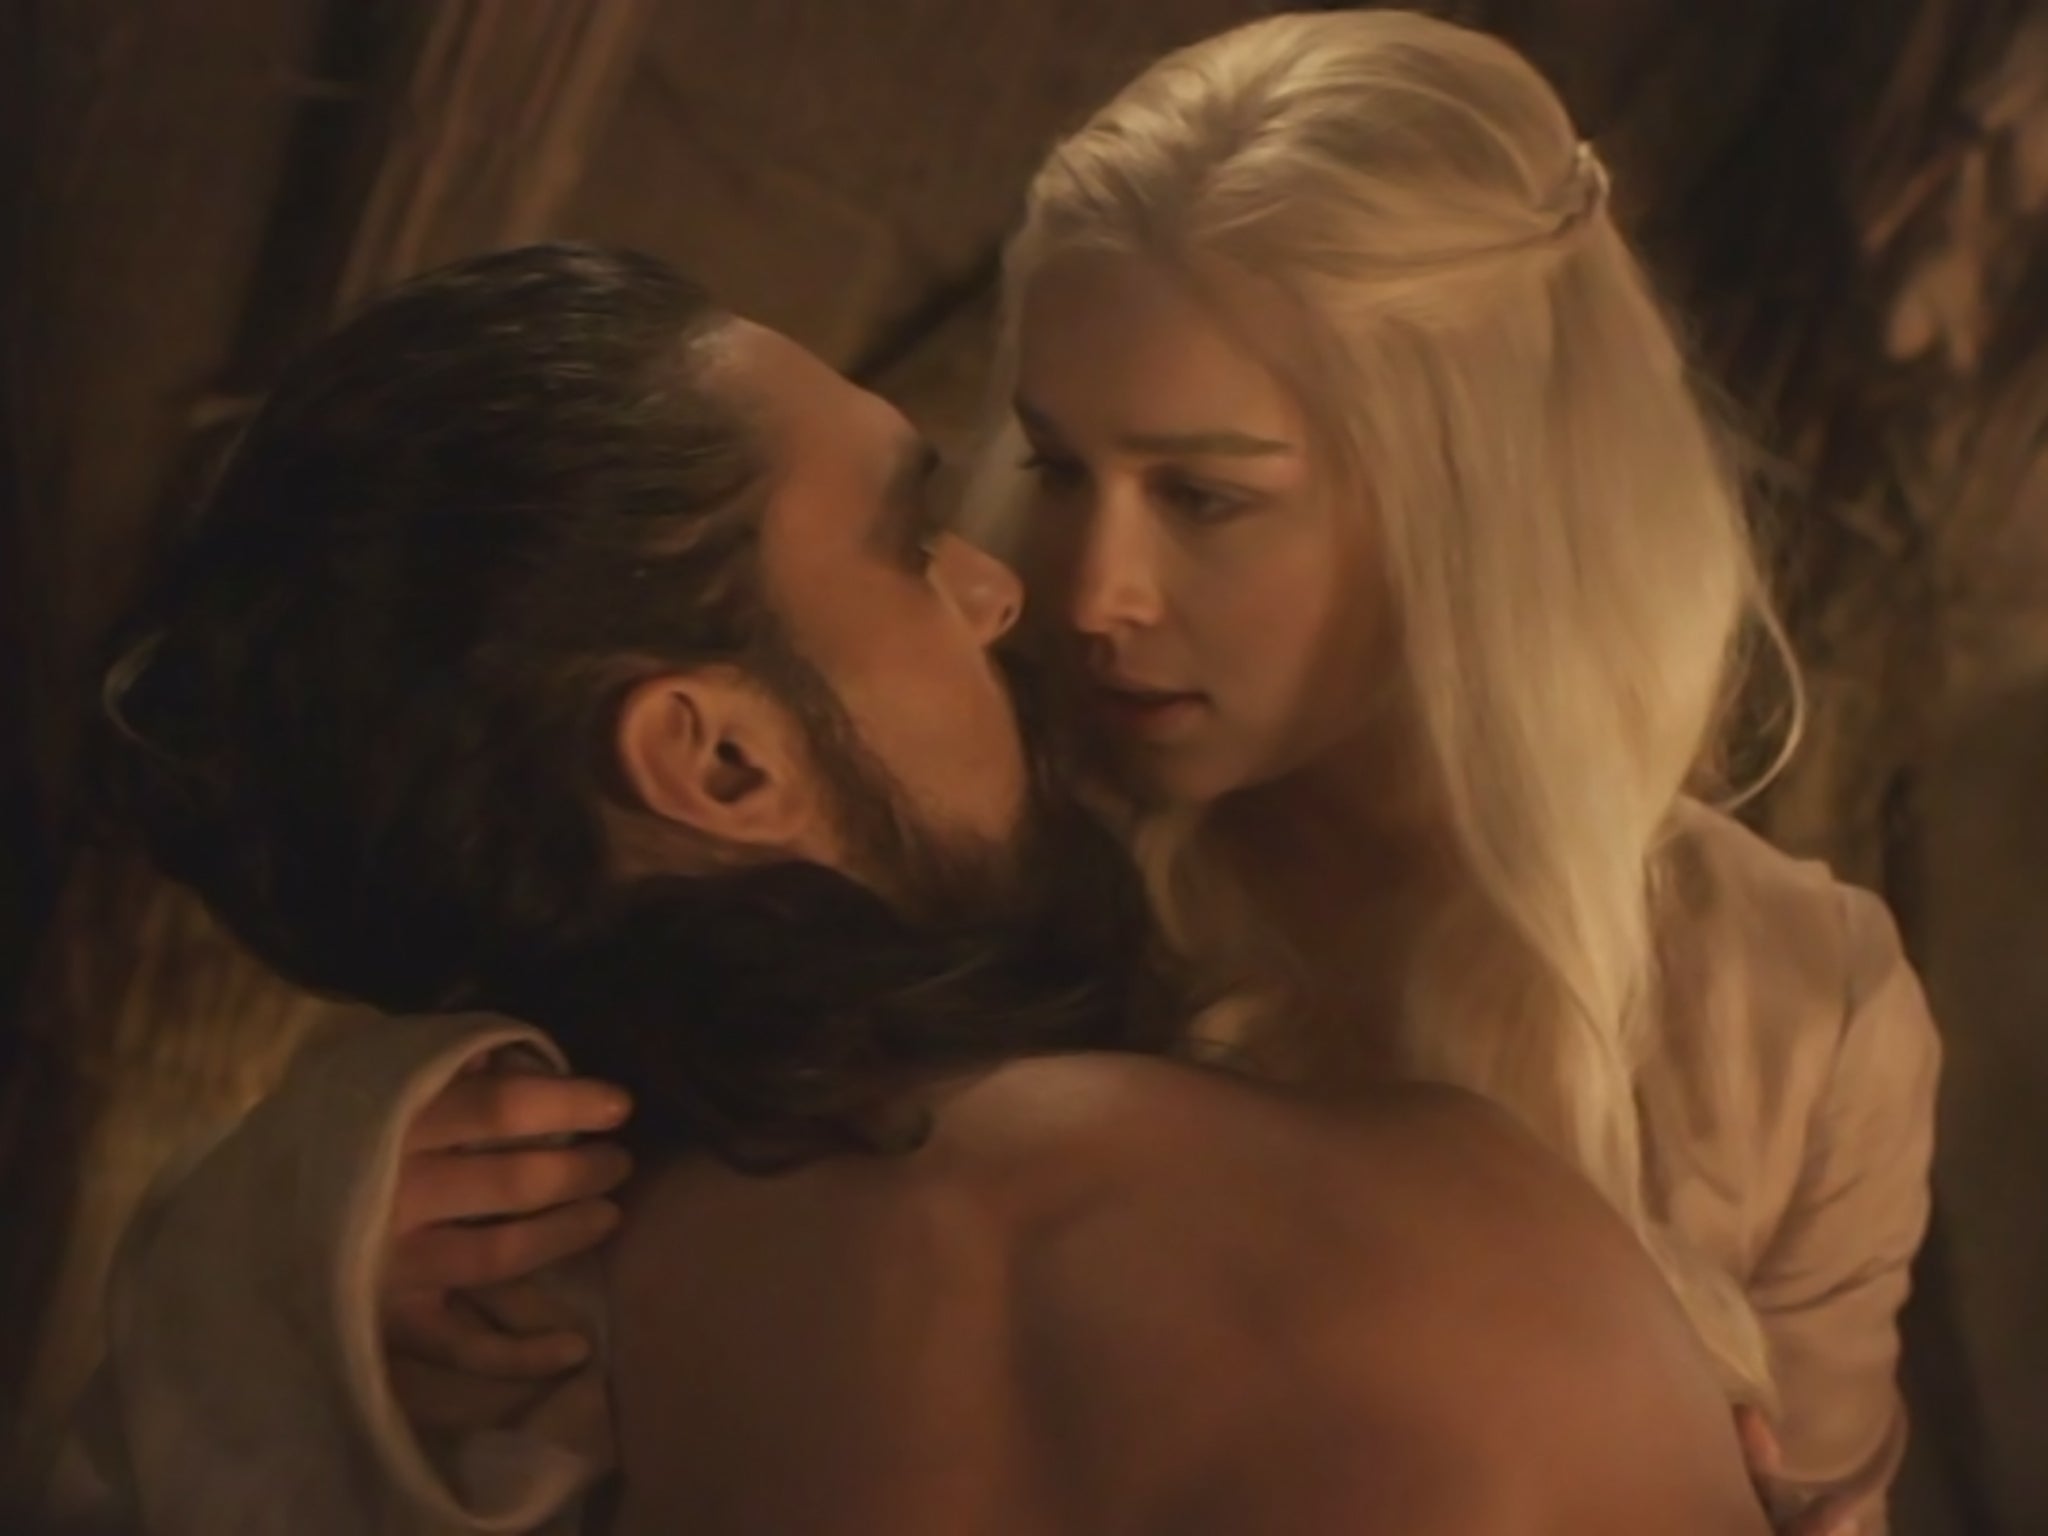 Jason Momoa and Emilia Clarke in the controversial rape scene in the first season of ‘Game of Thrones'